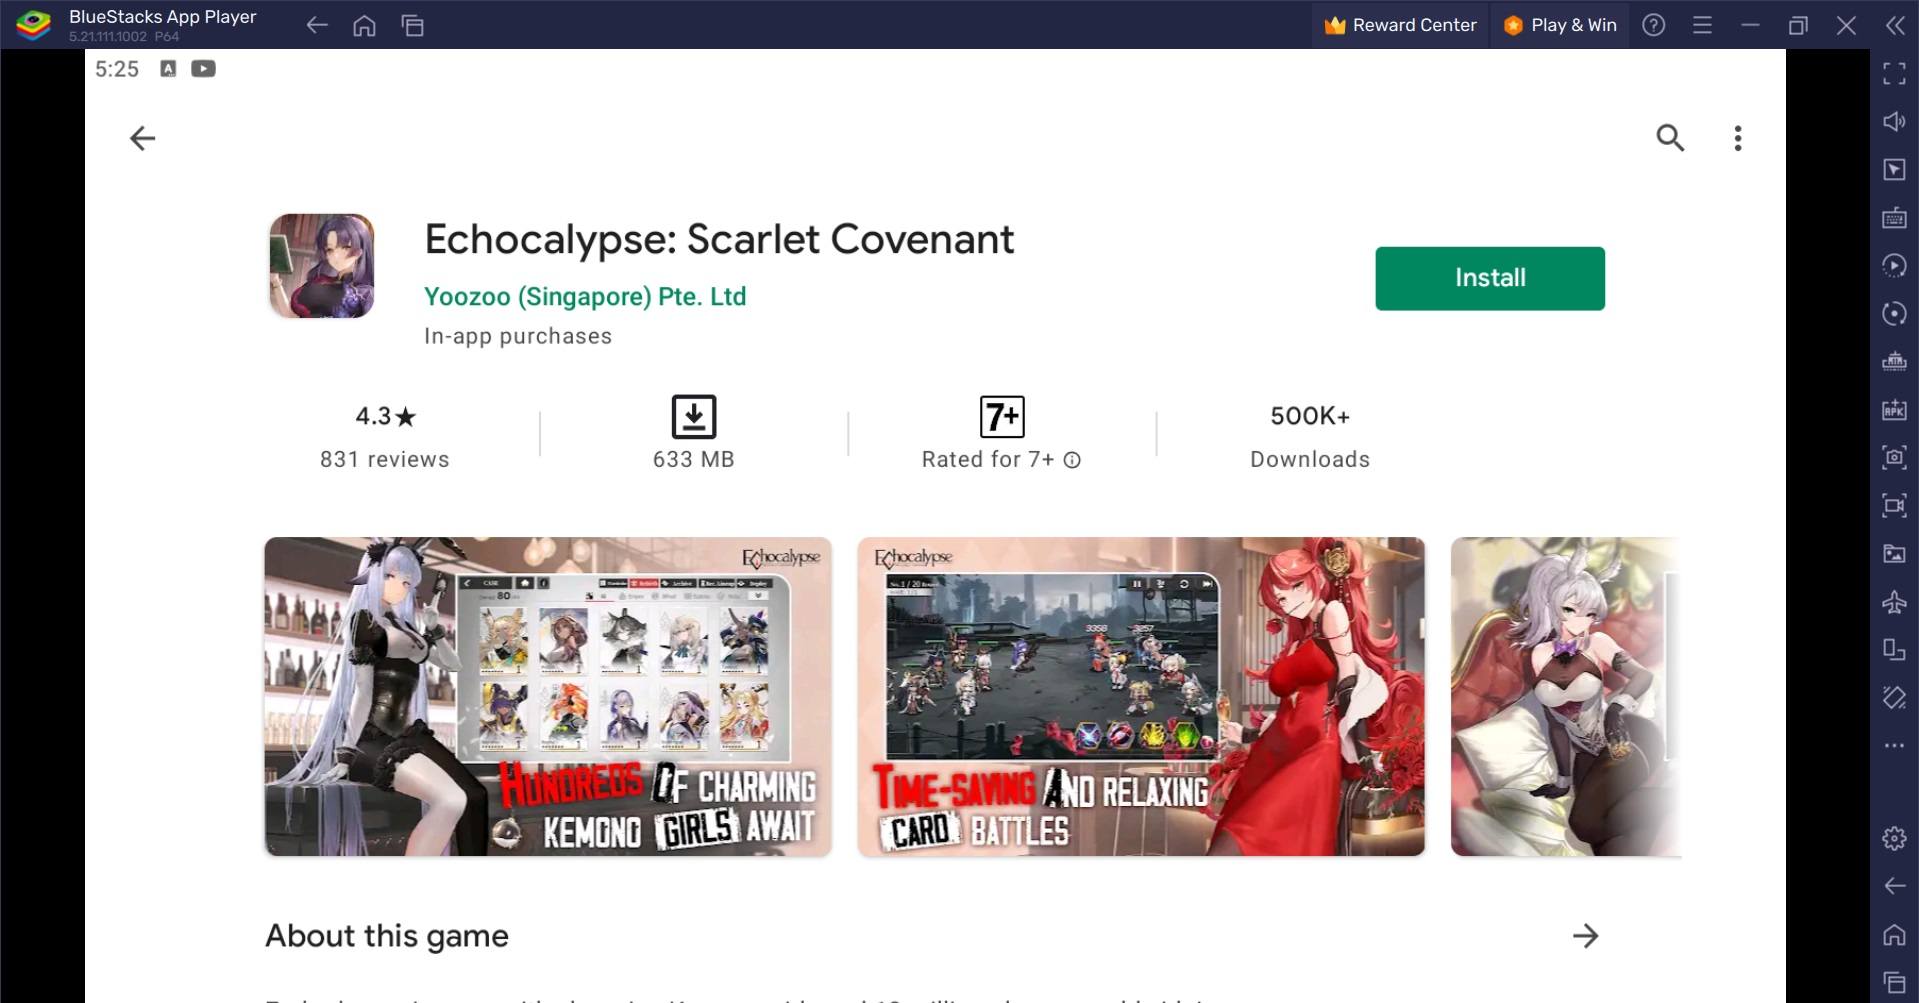 How to Play Echocalypse: Scarlet Covenant on PC with BlueStacks